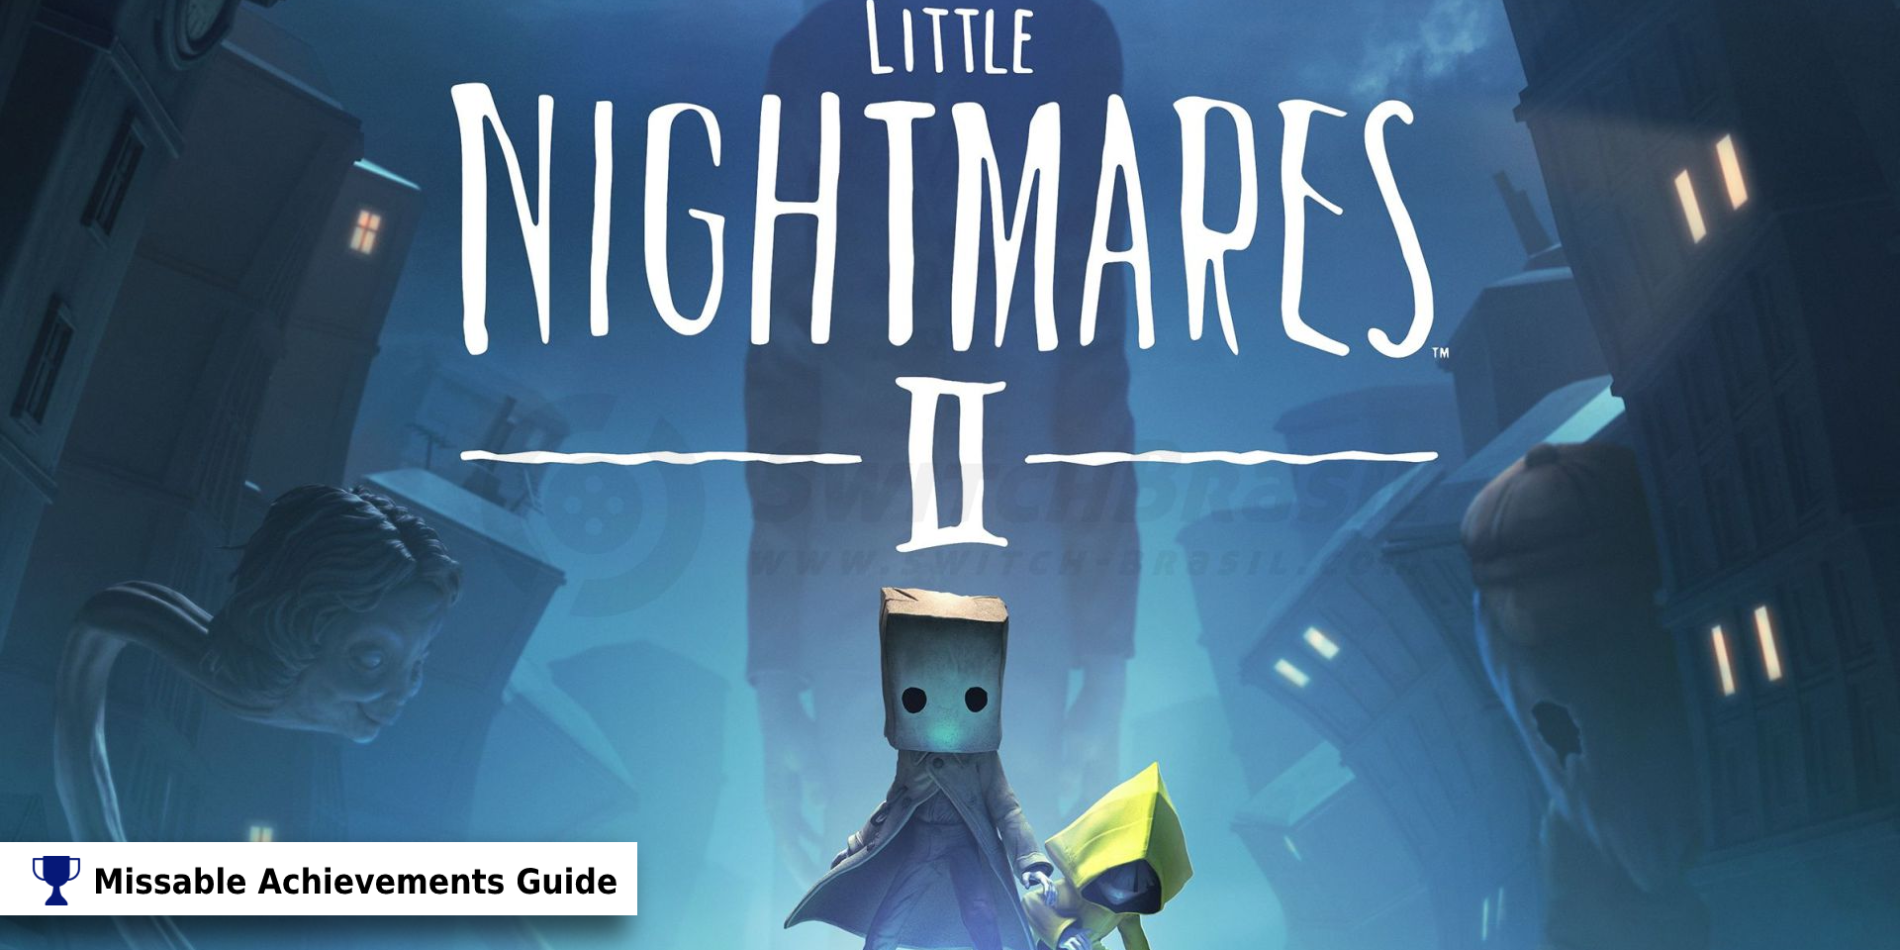 Little Nightmares 2 sales hit a million in a month